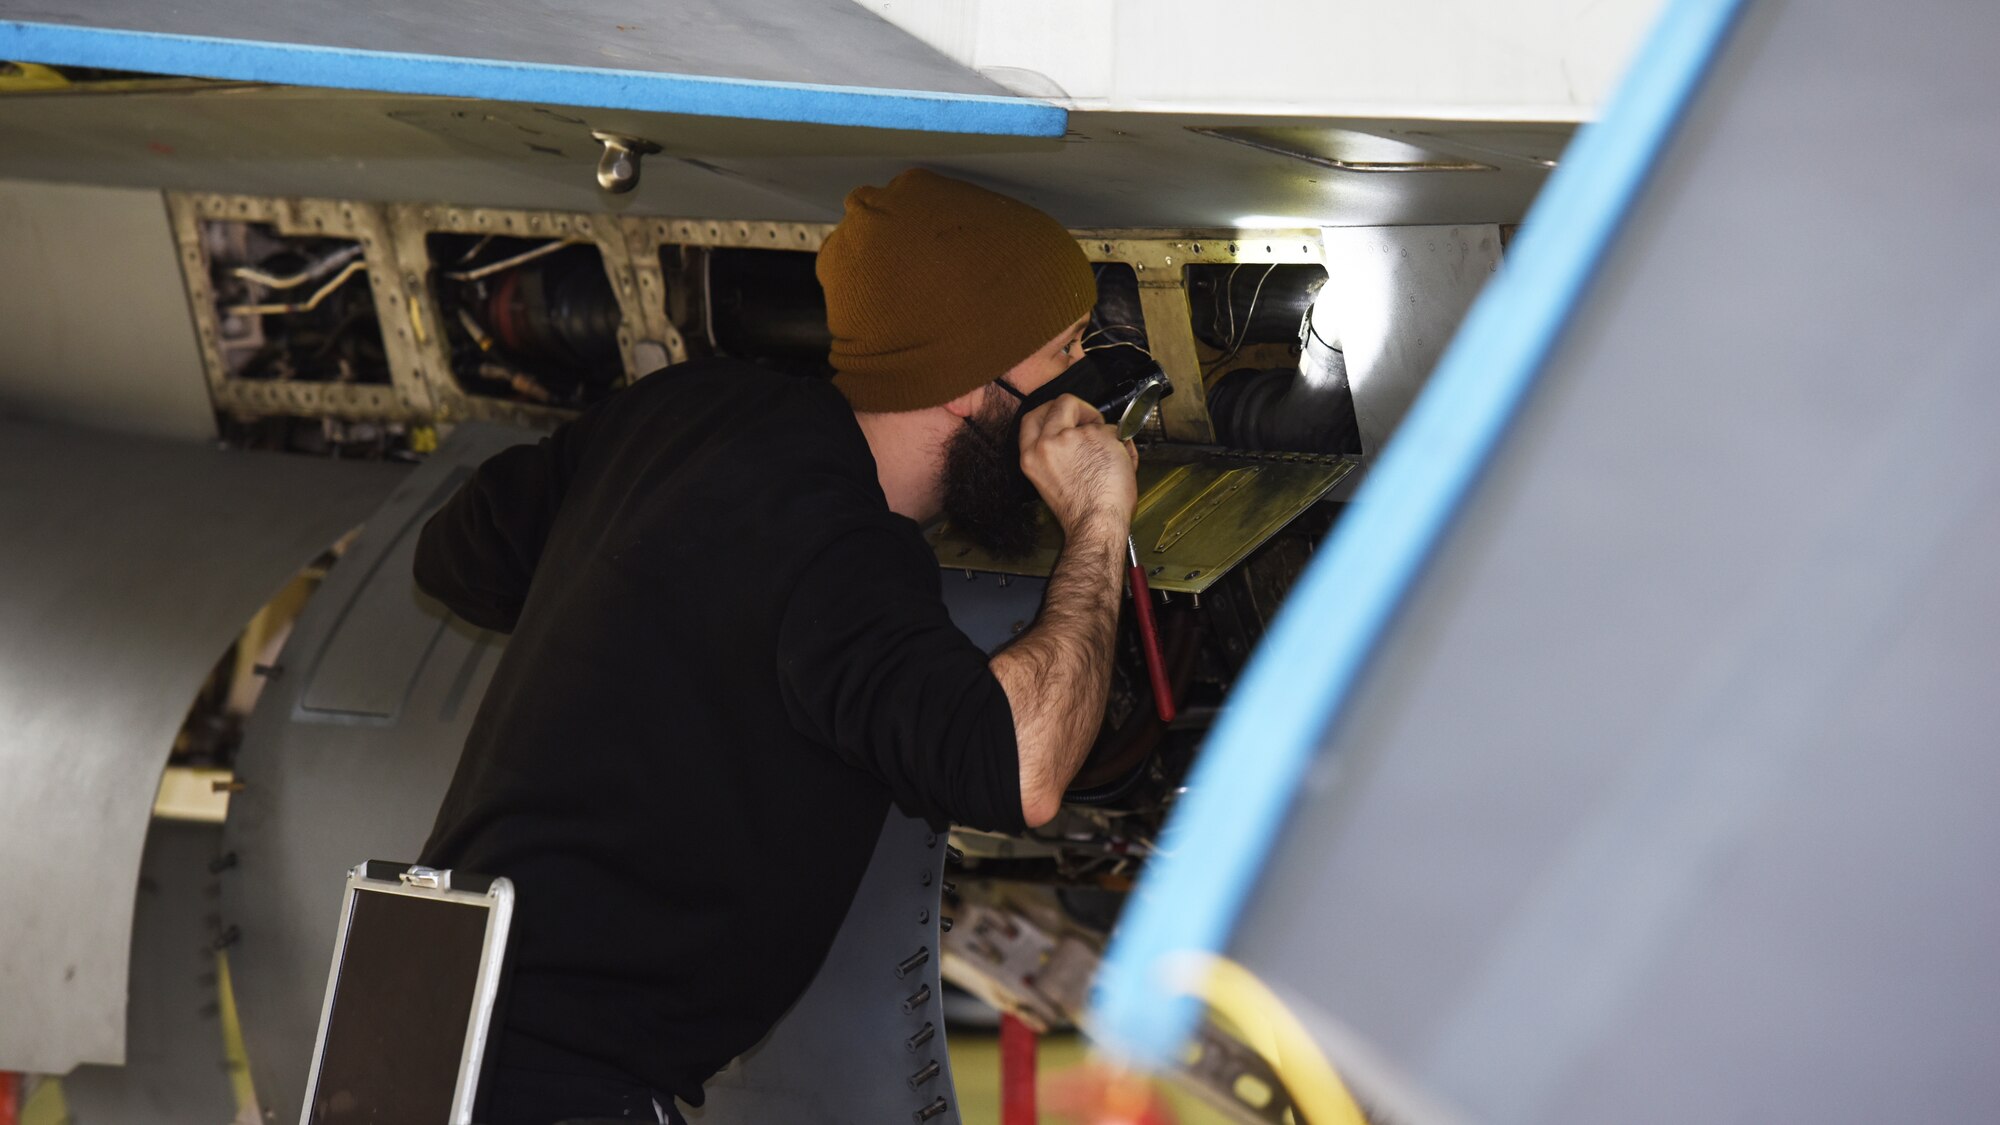 Mr. Joshua Larkin, 52nd Maintenance Squadron Aircraft Inspector, conducts an aircraft phase inspection on a U.S. Air Force F-16 Fighting Falcon. Larkin is one of two civilians employed by the 52nd Maintenance Squadron Maintenance Flight. (U.S. Air Force photo by Tech. Sgt. Tony Plyler)